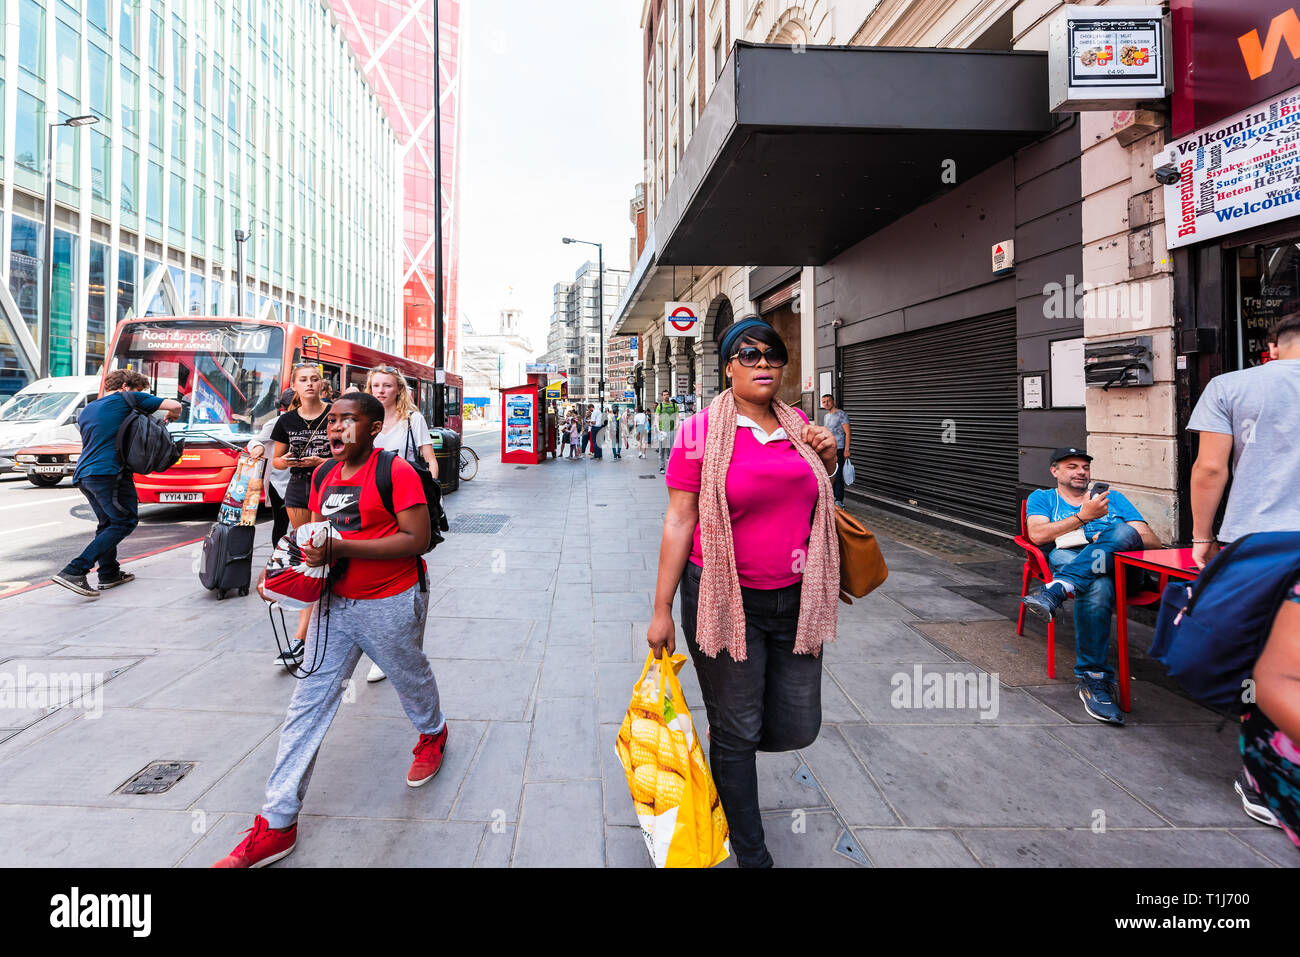 London, UK - June 24, 2018: Many people walking on sidewalk pavement street shopping by store retail during day in city crowded busy Stock Photo